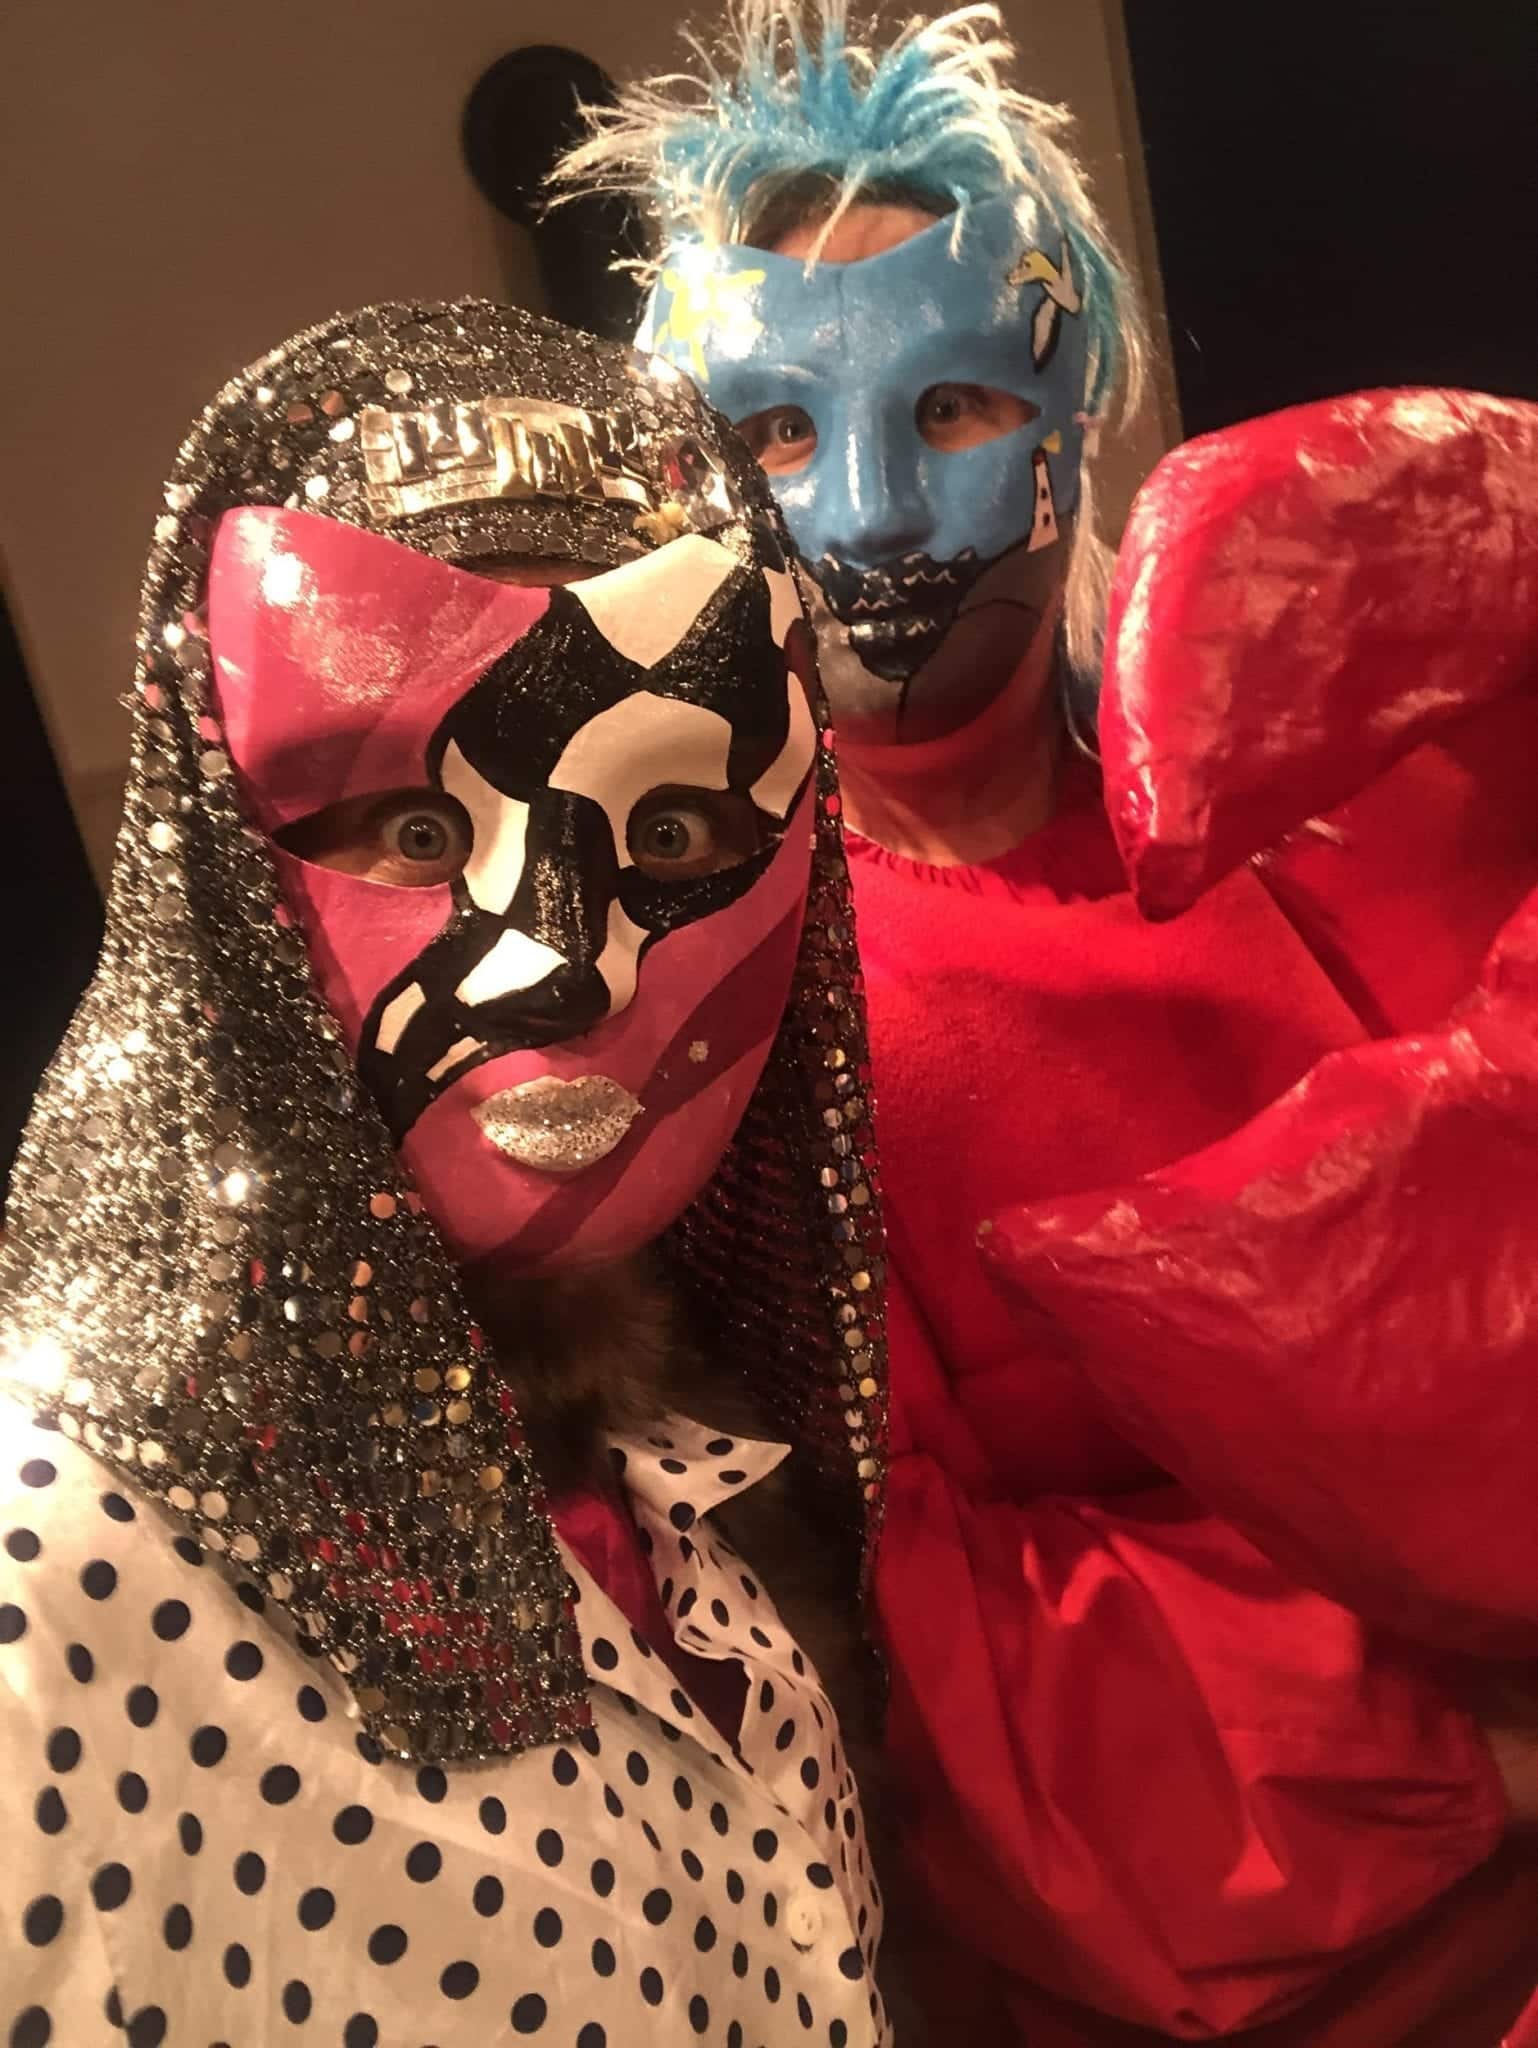 Kate wears a pink and black and white mask with a silver Egyptian-style head covering and black and white spotted top. Cailin wears her Nova Scotia seascape painted mask with a spiky light blue wig while wearing a red lobster costume.